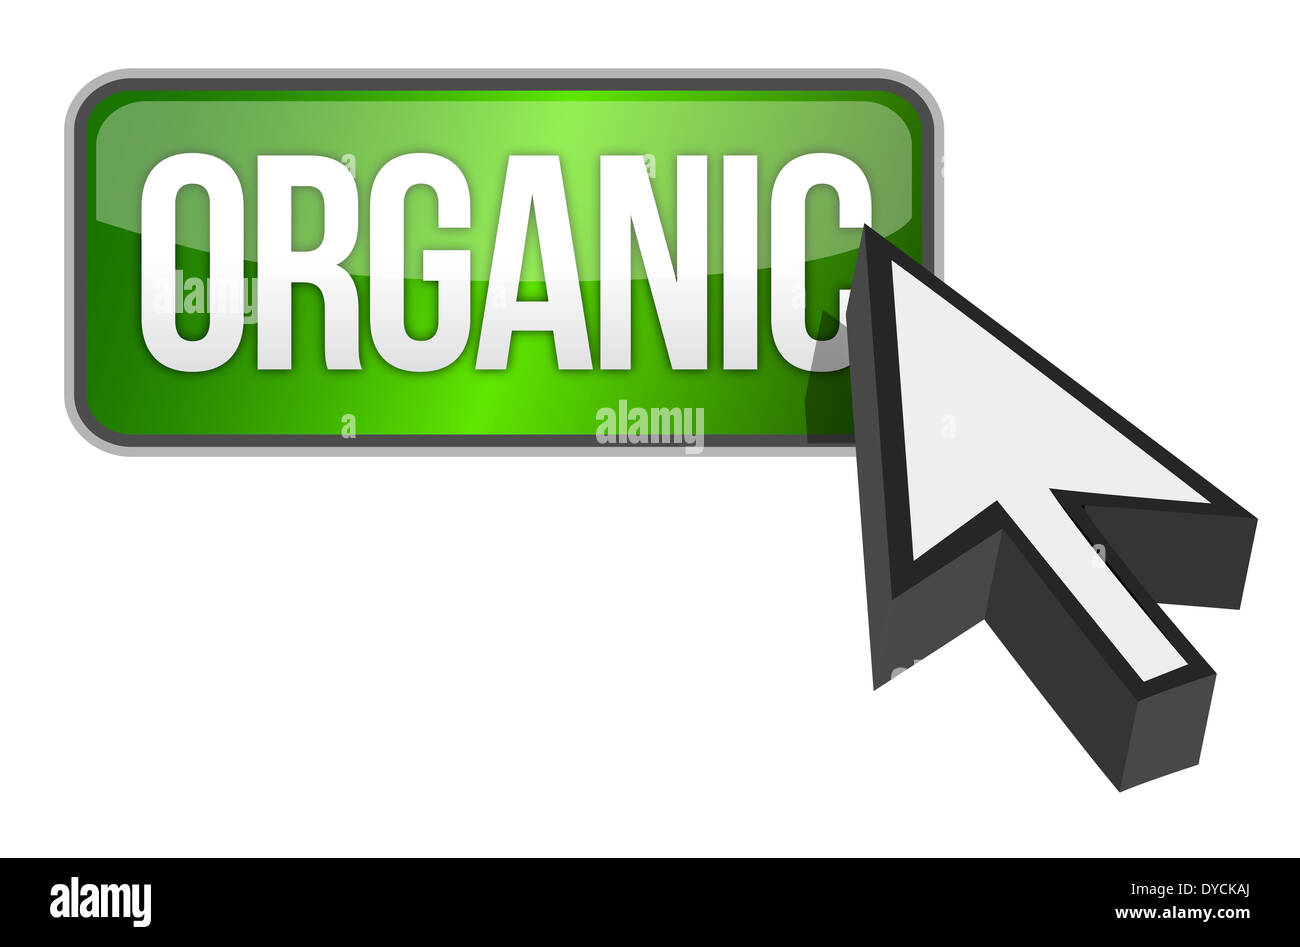 Organic green 3d banner with white text illustration design Stock Photo